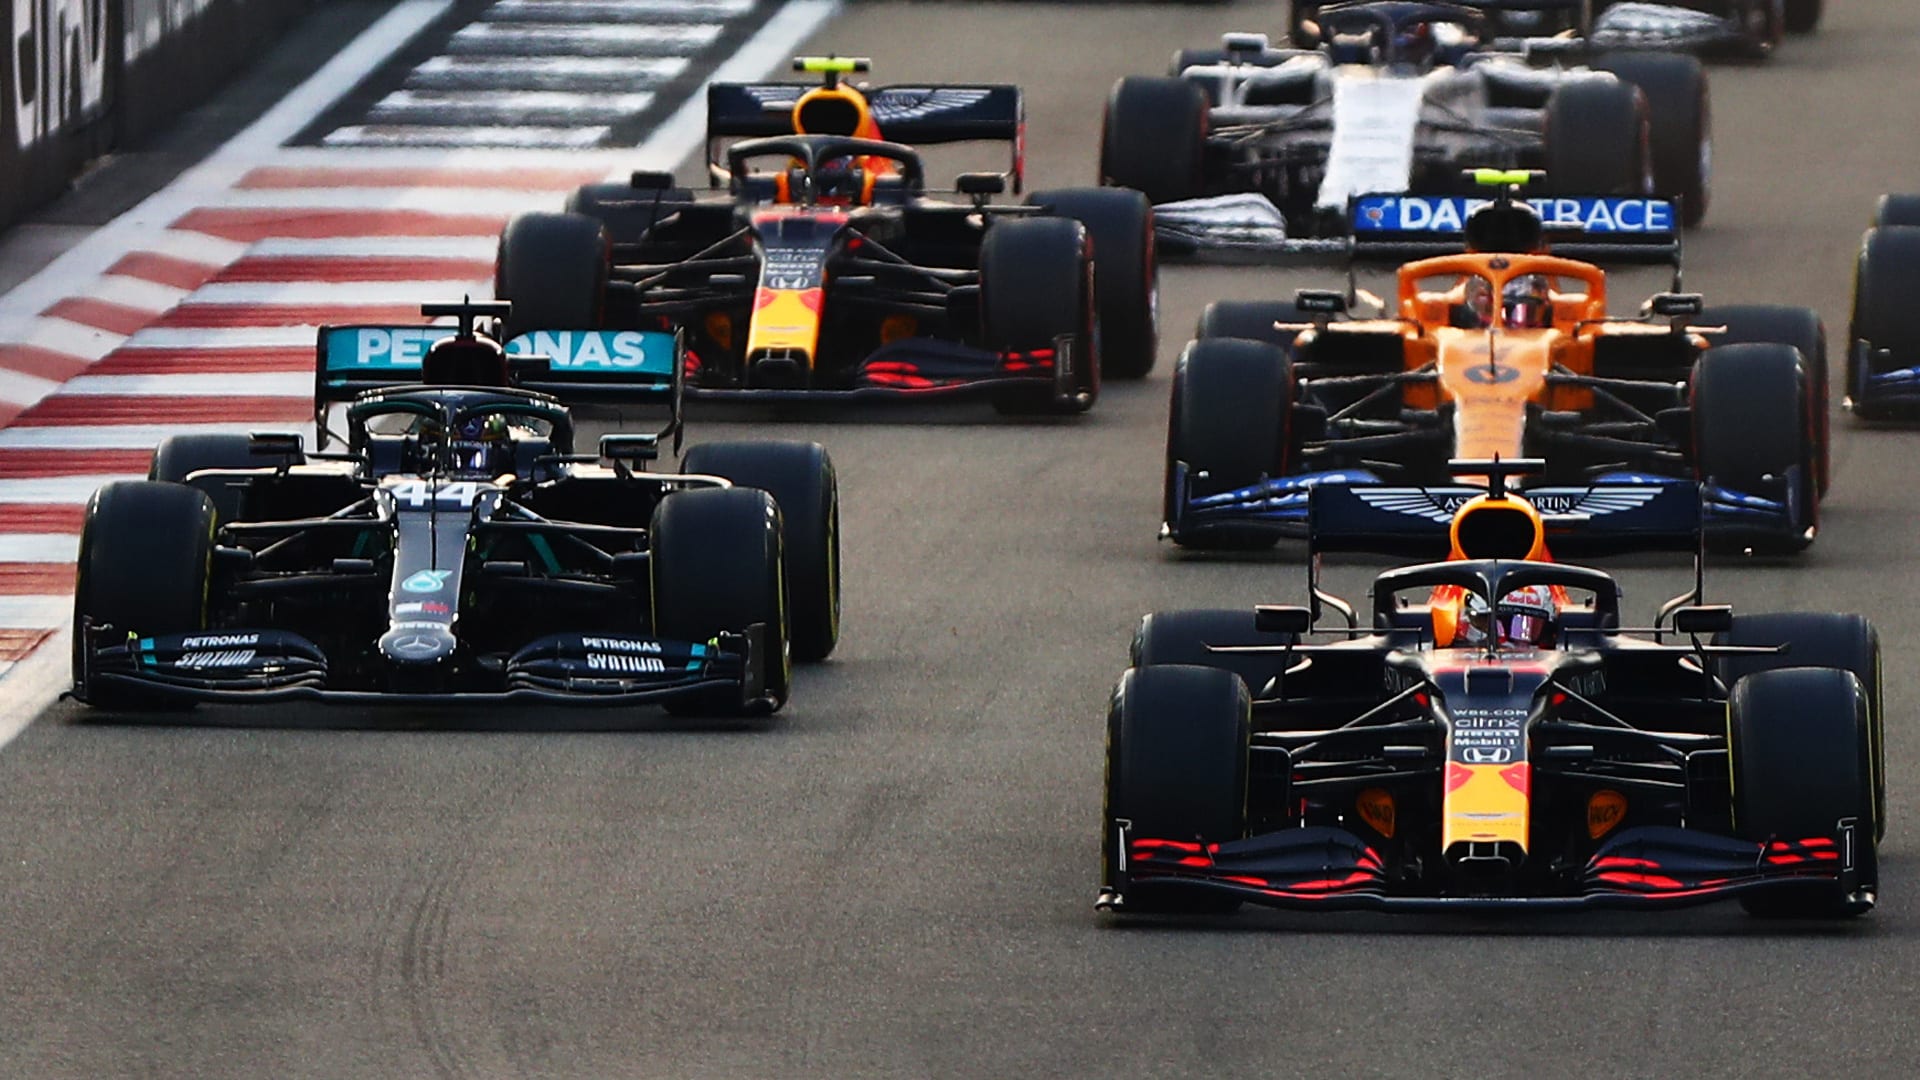 STRATEGY GUIDE What are the possible race strategies for the Abu Dhabi Grand Prix? Formula 1®